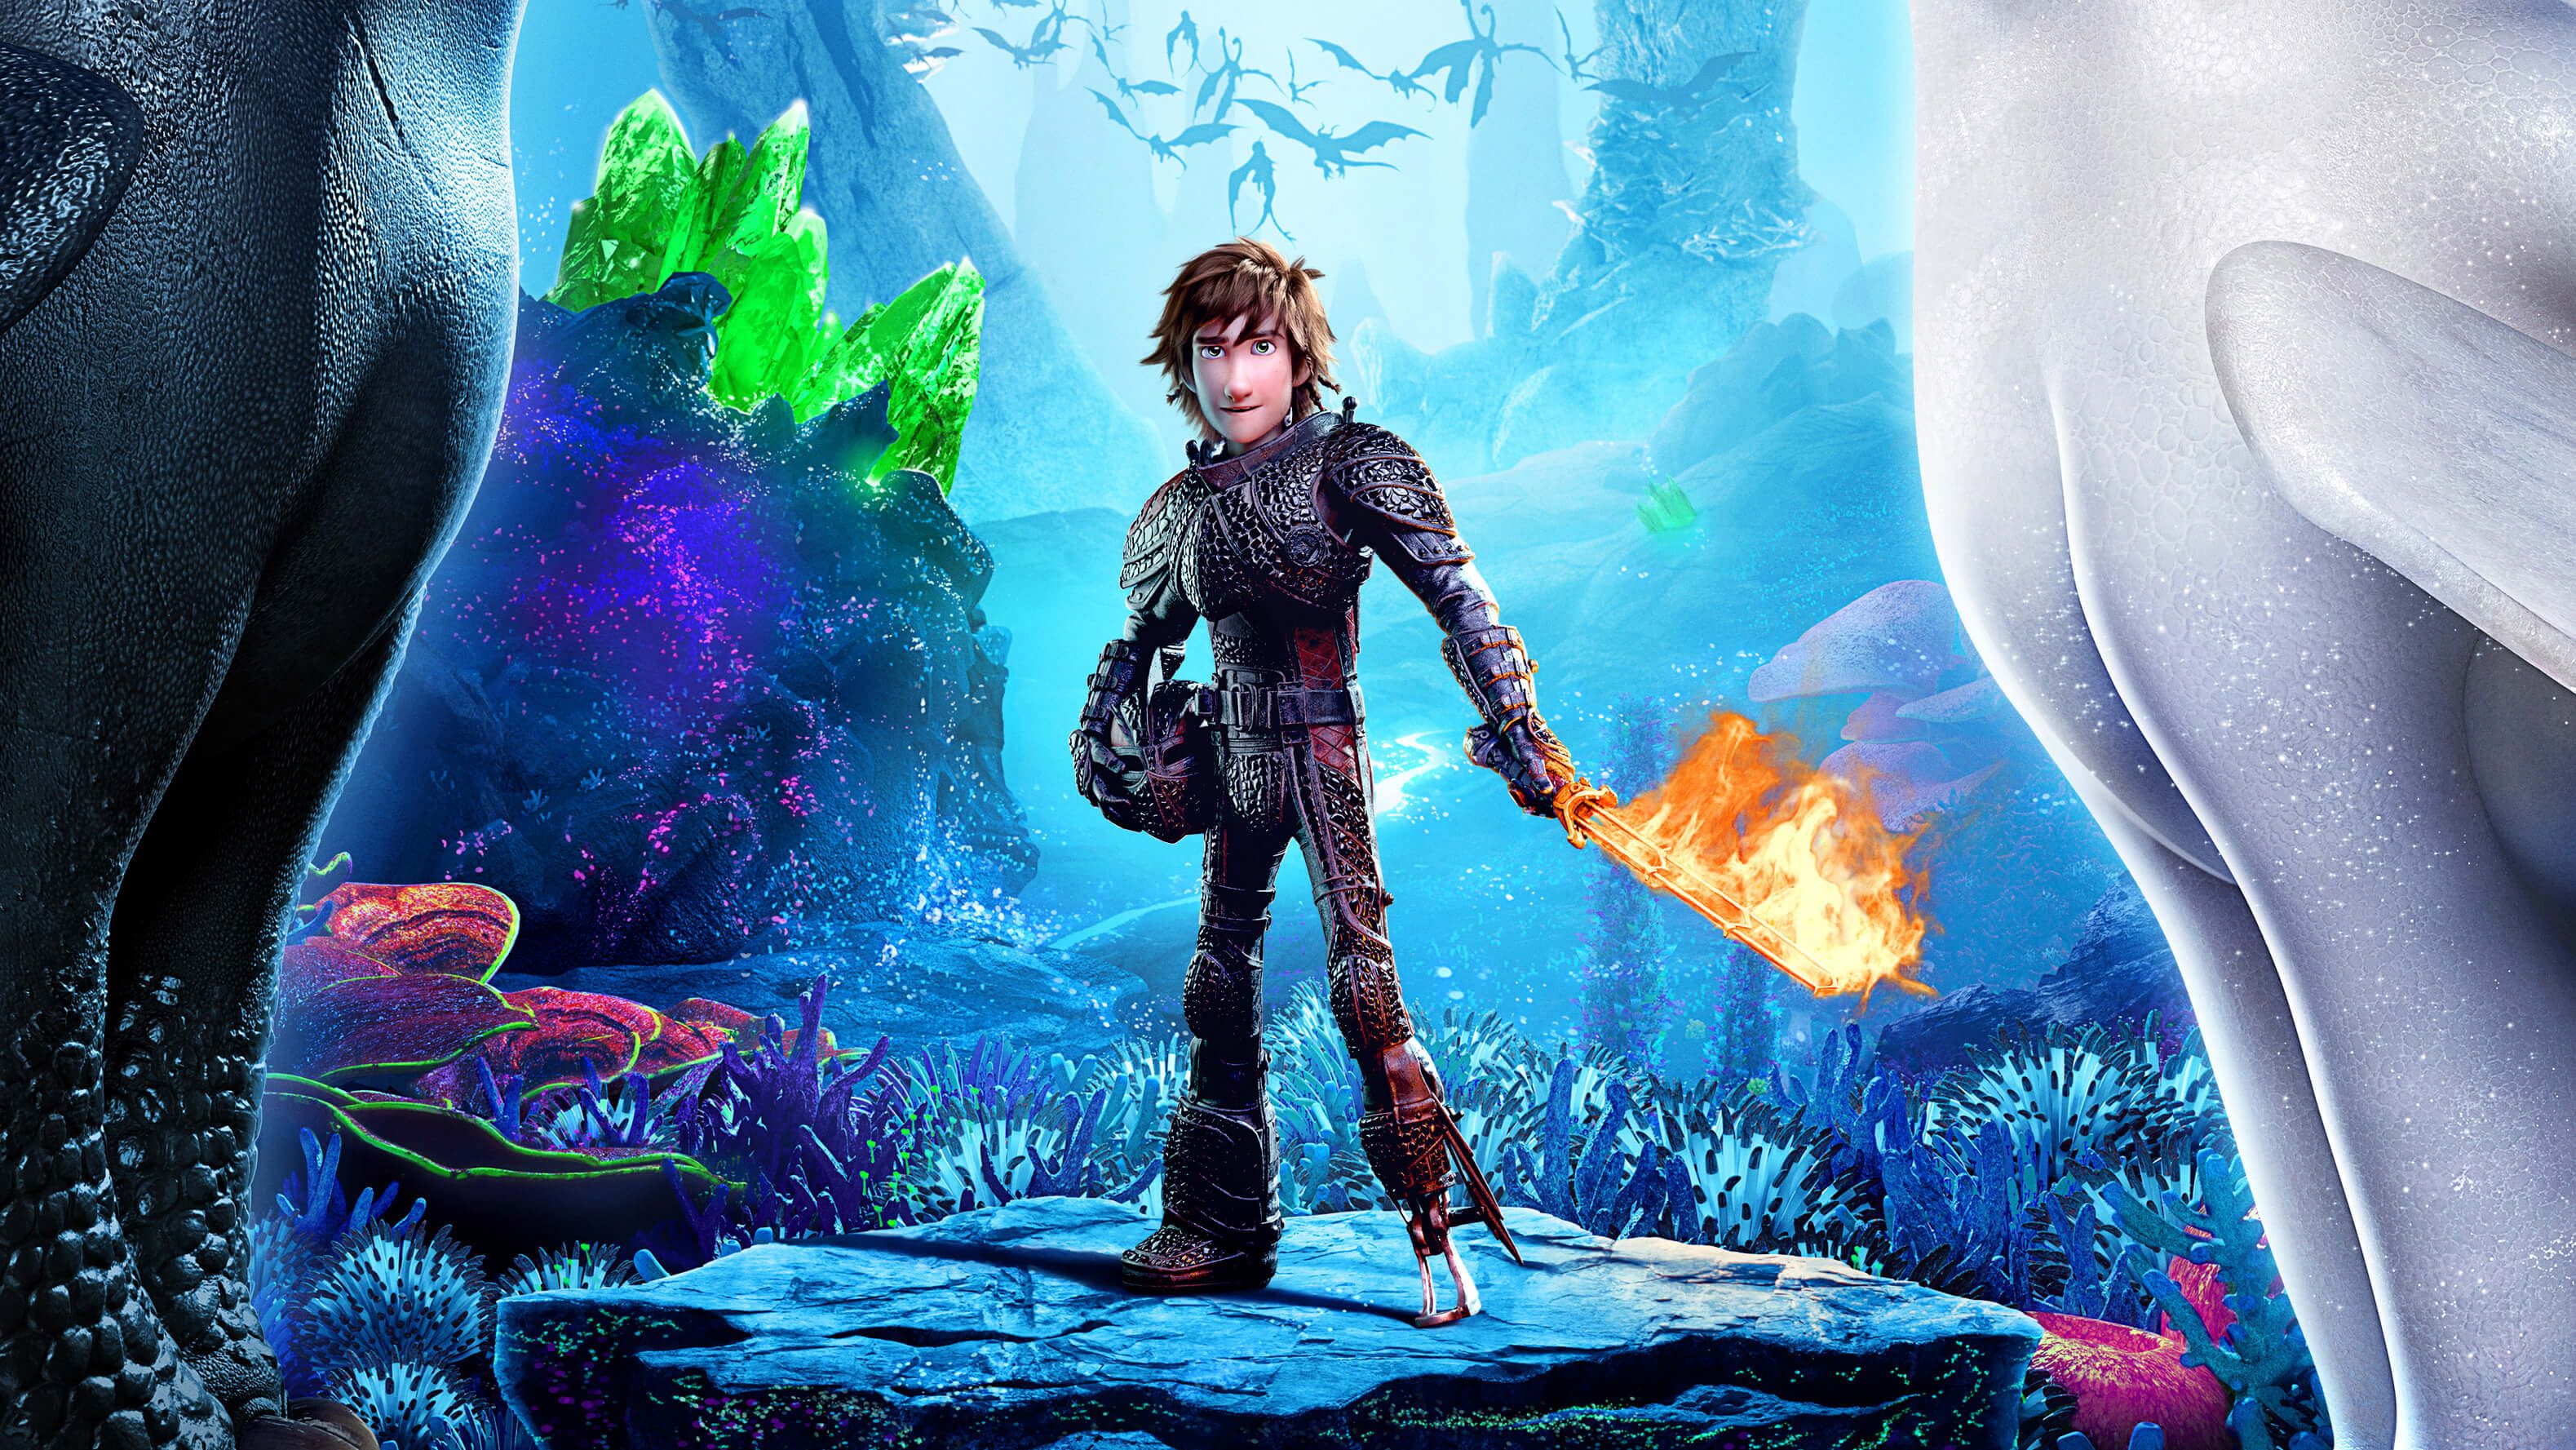 How To Train Your Dragon 3 Widescreen Wallpaper 66677 3158x1777px